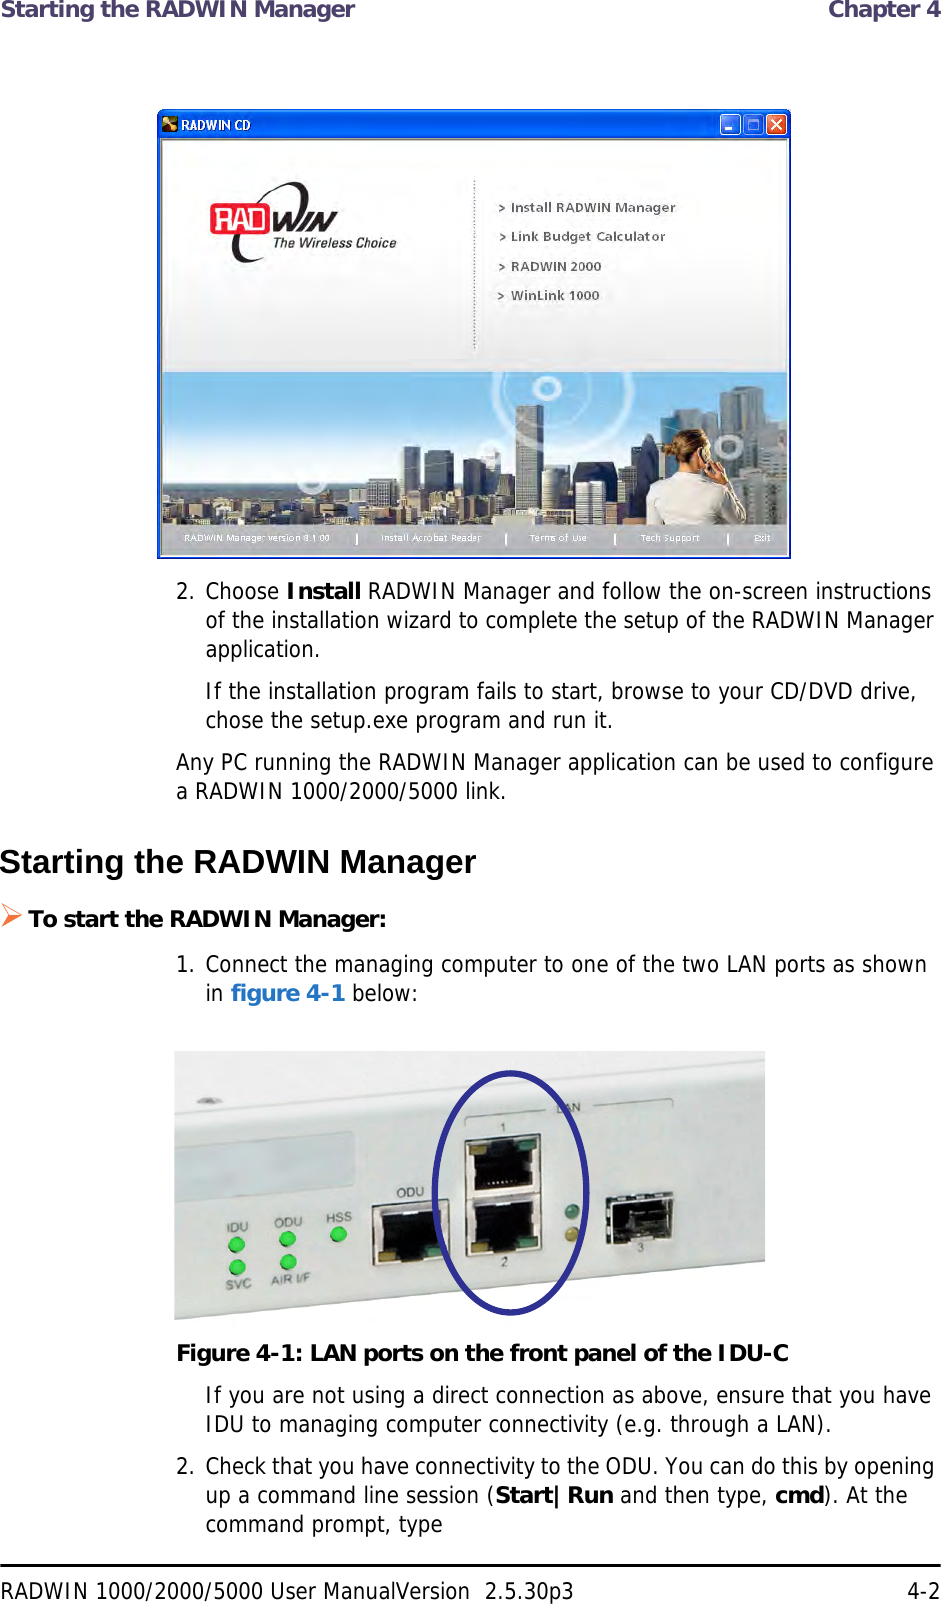 Starting the RADWIN Manager  Chapter 4RADWIN 1000/2000/5000 User ManualVersion  2.5.30p3 4-22. Choose Install RADWIN Manager and follow the on-screen instructions of the installation wizard to complete the setup of the RADWIN Manager application.If the installation program fails to start, browse to your CD/DVD drive, chose the setup.exe program and run it.Any PC running the RADWIN Manager application can be used to configure a RADWIN 1000/2000/5000 link.Starting the RADWIN Manager To start the RADWIN Manager:1. Connect the managing computer to one of the two LAN ports as shown in figure 4-1 below:Figure 4-1: LAN ports on the front panel of the IDU-CIf you are not using a direct connection as above, ensure that you have IDU to managing computer connectivity (e.g. through a LAN).2. Check that you have connectivity to the ODU. You can do this by opening up a command line session (Start|Run and then type, cmd). At the command prompt, type